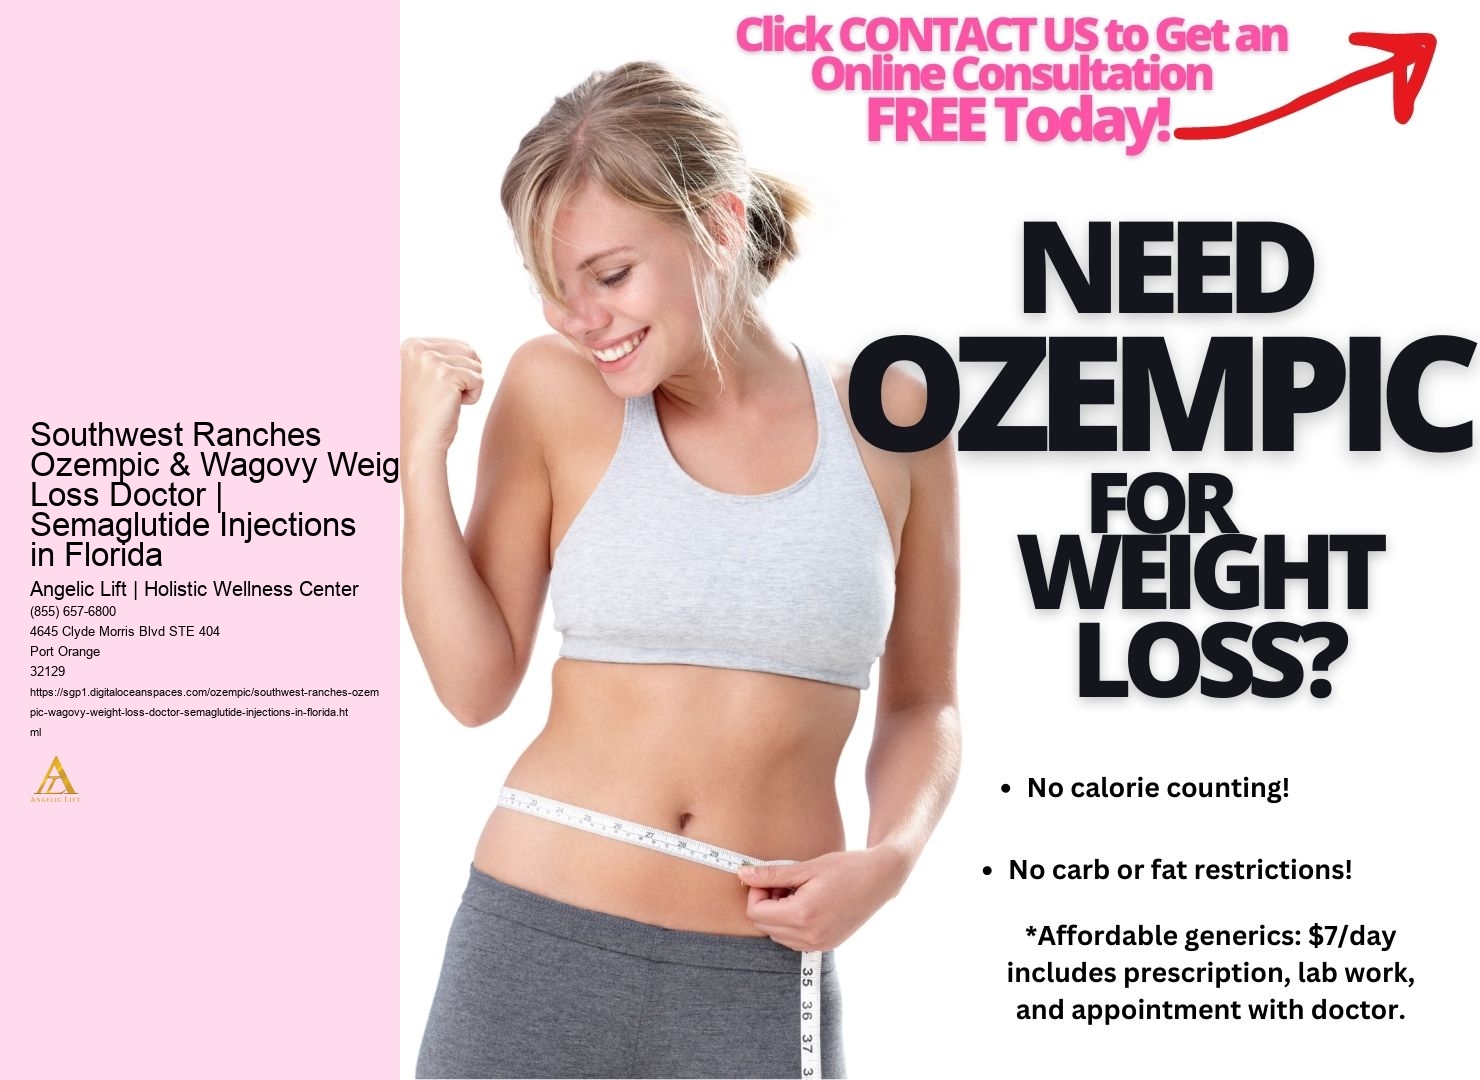 Southwest Ranches Ozempic & Wagovy Weight Loss Doctor | Semaglutide Injections in Florida